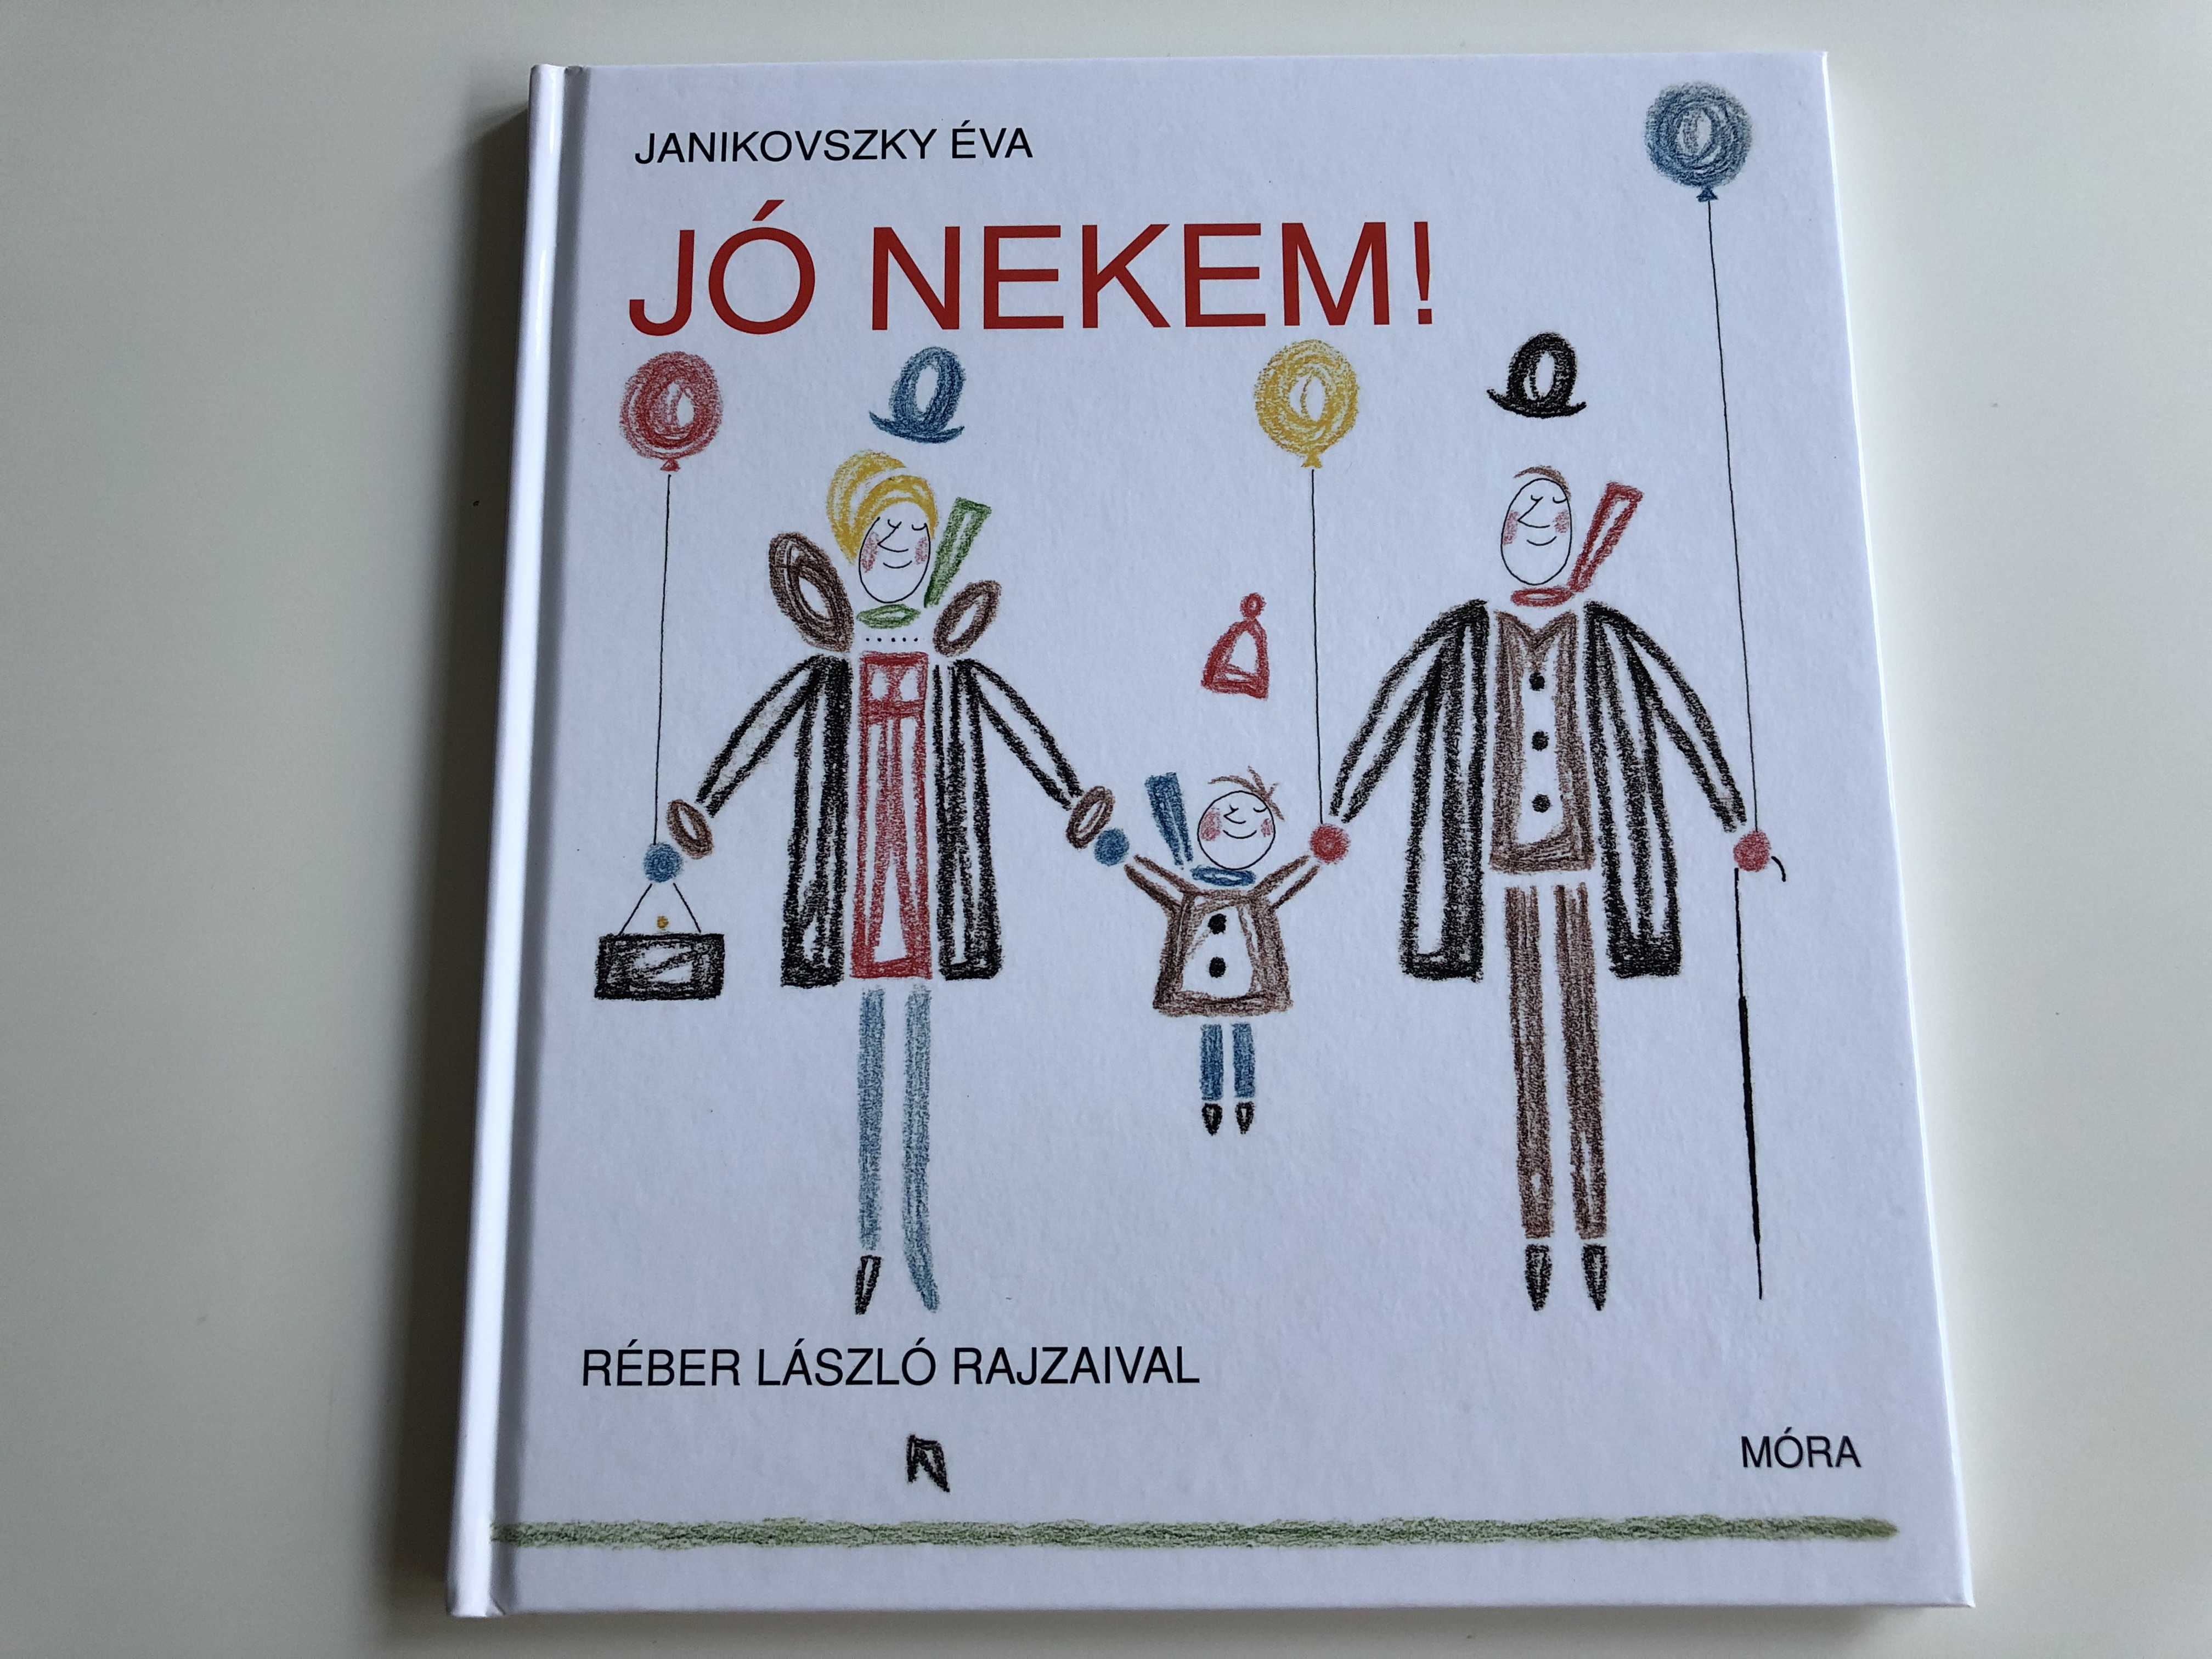 j-nekem-by-janikovszky-va-good-for-me-hungarian-children-s-book-for-ages-3-and-up-r-ber-l-szl-rajzaival-m-ra-k-nyvkiad-2012-7th-edition-1-.jpg